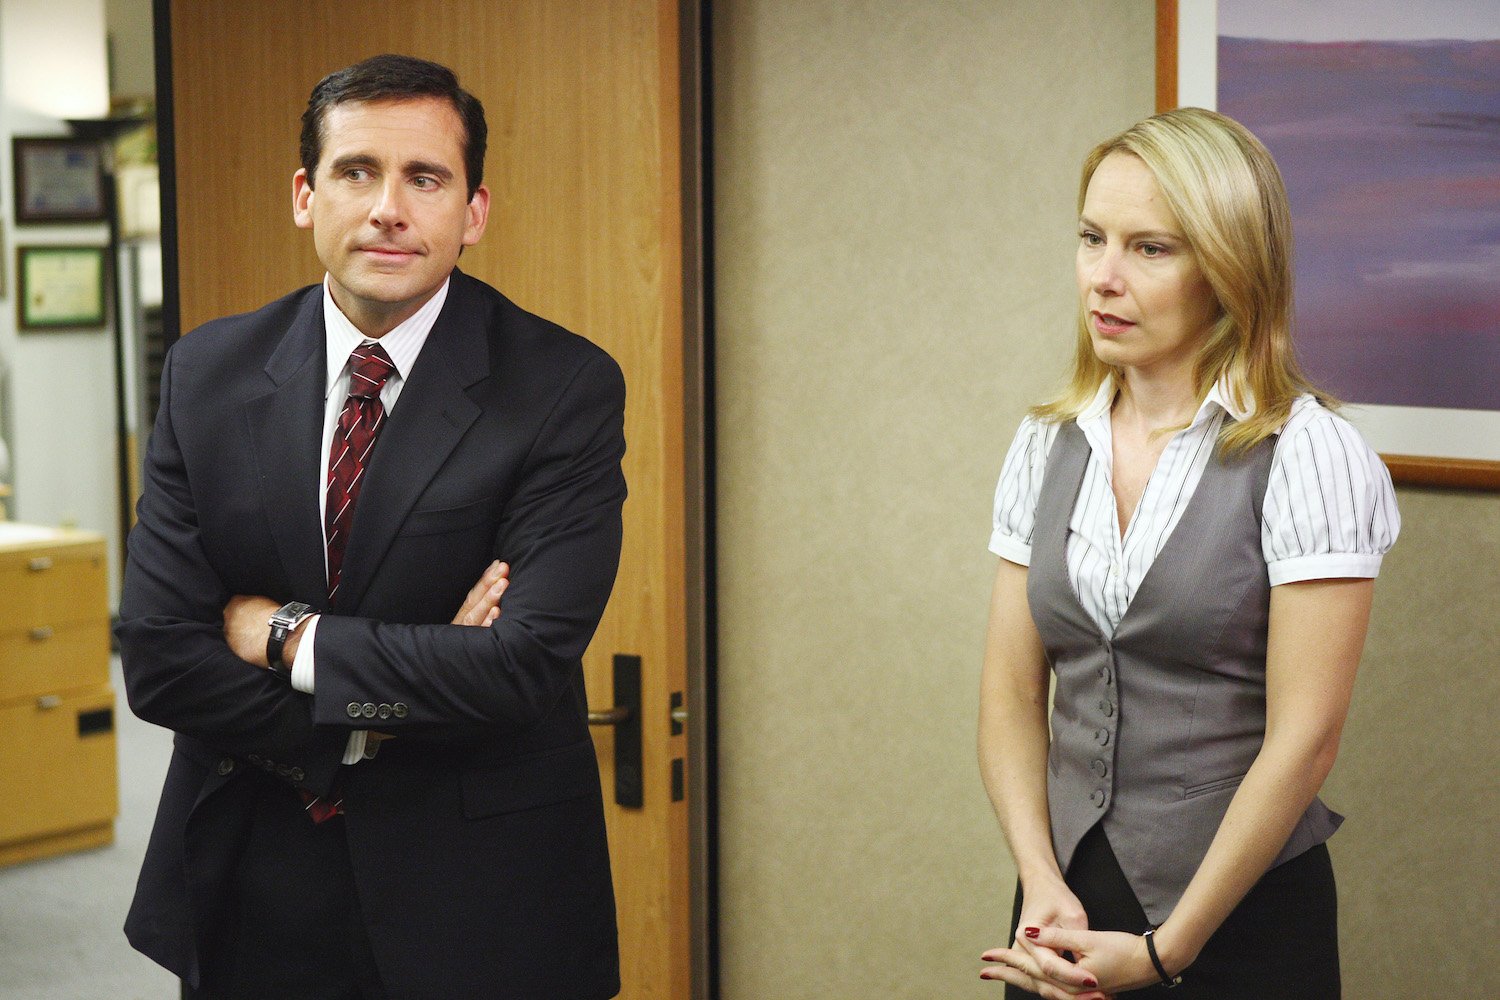 The Office: Steve Carell as Michael Scott and Amy Ryan as Holly Flax